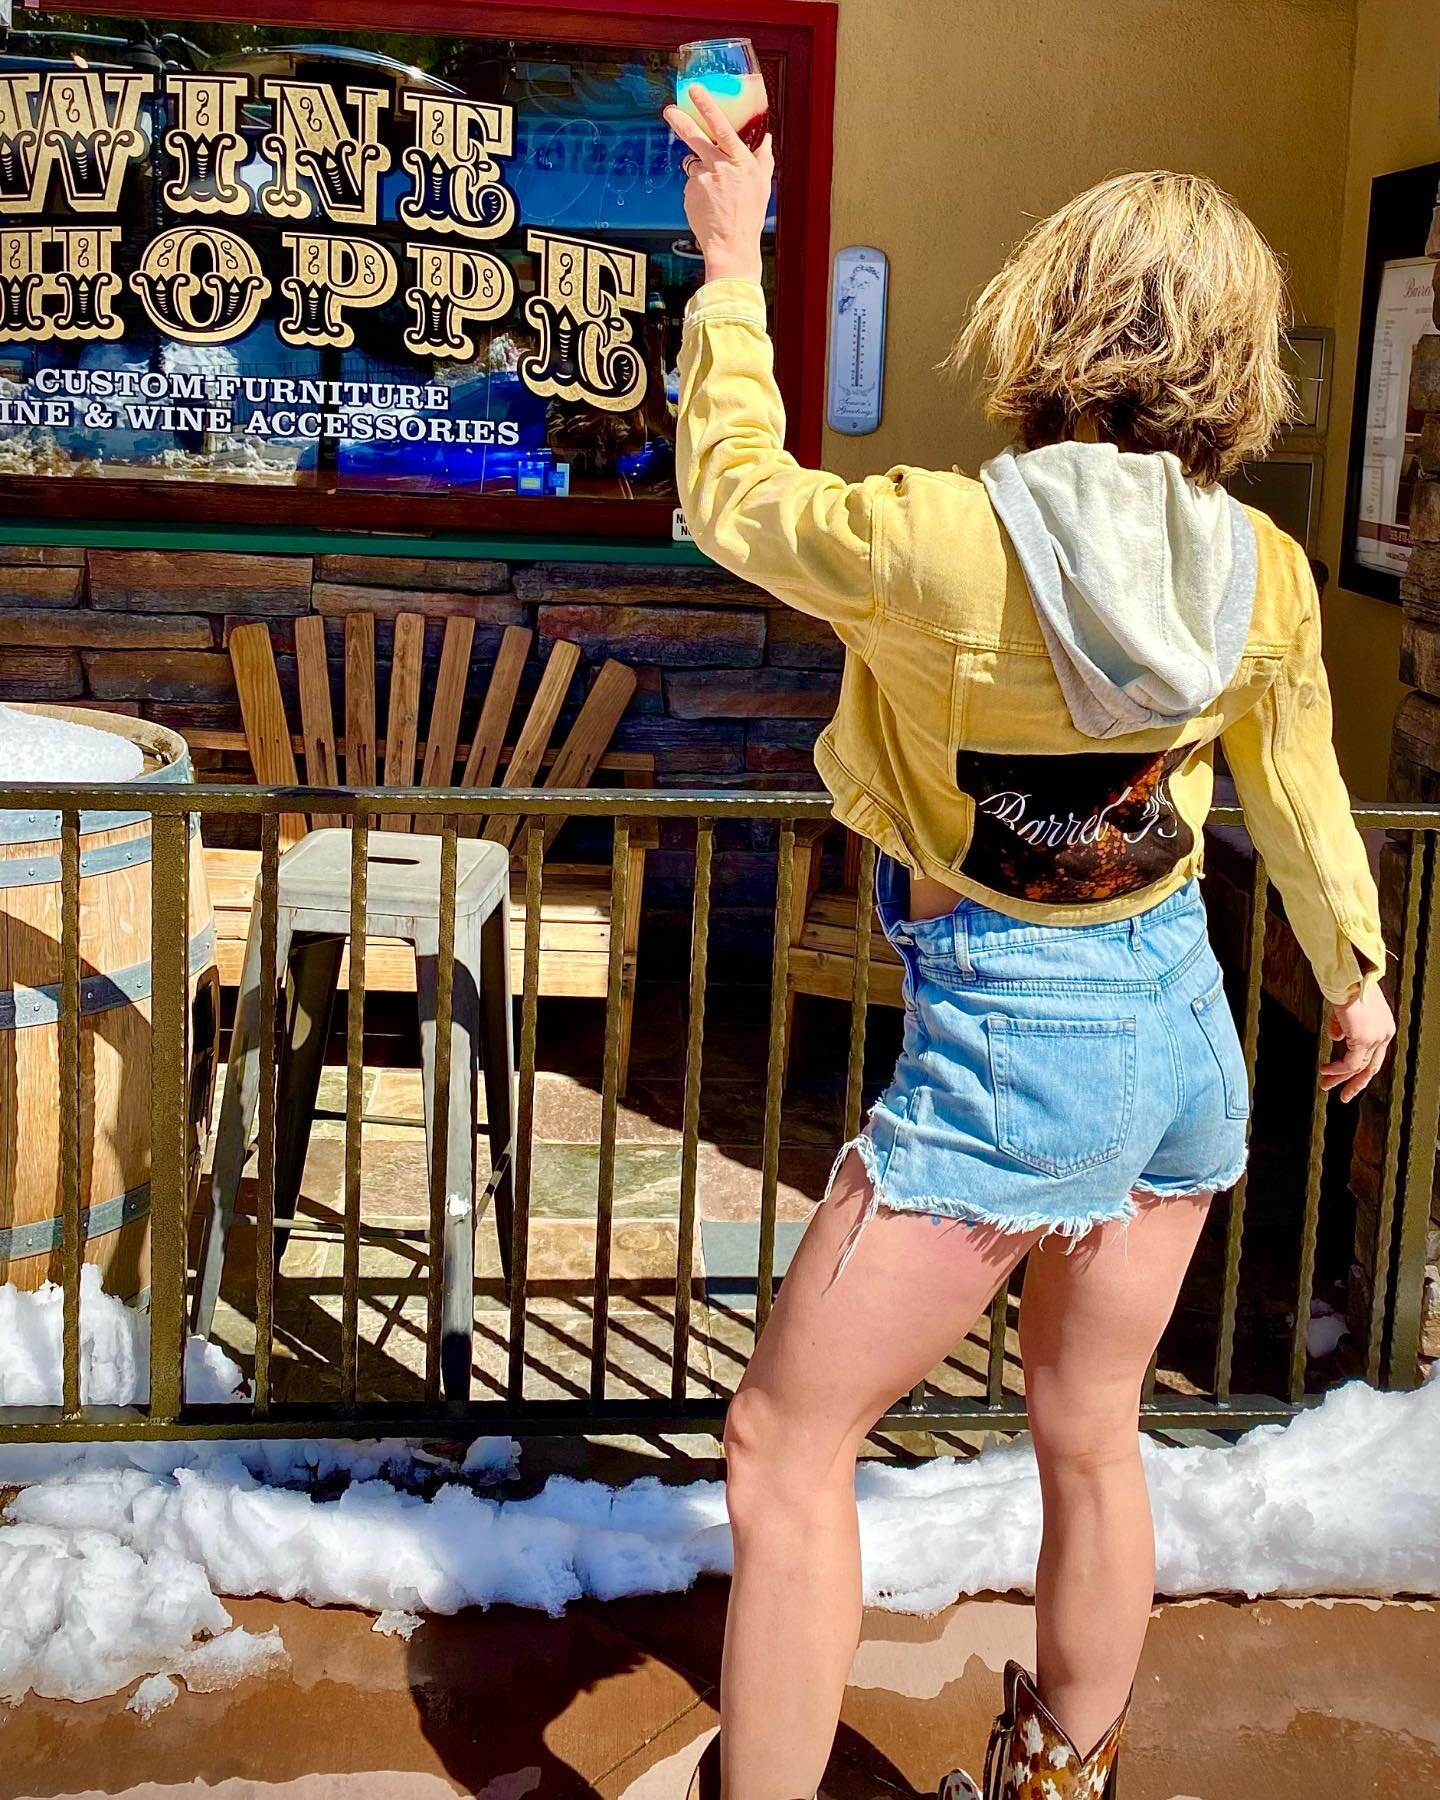 Spring Break has begun for Big Bear and LA county will be joining us this weekend. What are your Spring Break plans? Some leisurely rest or a hoot &lsquo;n hollering release, either way Barrel 33 provides 🥂#SunsOutBunsOut #ApresSki #BigBearLake #Spr